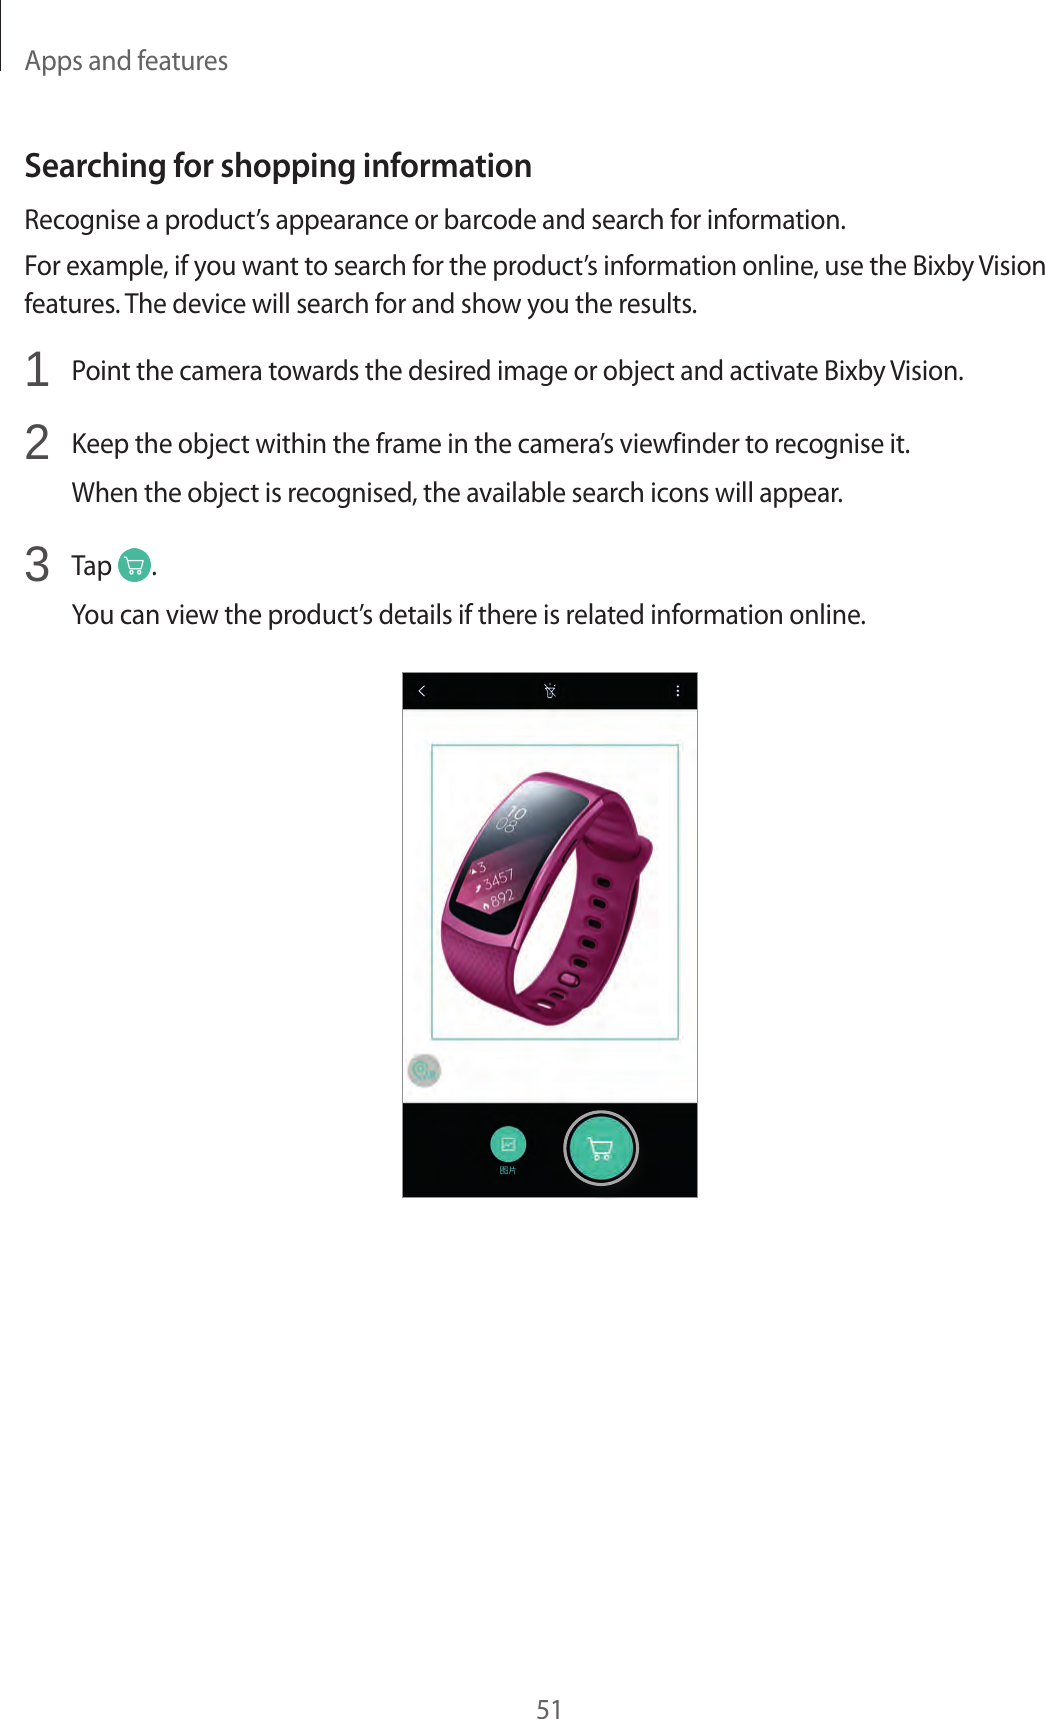 Apps and features51Searching for shopping informationRecognise a product’s appearance or barcode and search for information.For example, if you want to search for the product’s information online, use the Bixby Vision features. The device will search for and show you the results.1  Point the camera towards the desired image or object and activate Bixby Vision.2  Keep the object within the frame in the camera’s viewfinder to recognise it.When the object is recognised, the available search icons will appear.3  Tap  .You can view the product’s details if there is related information online.